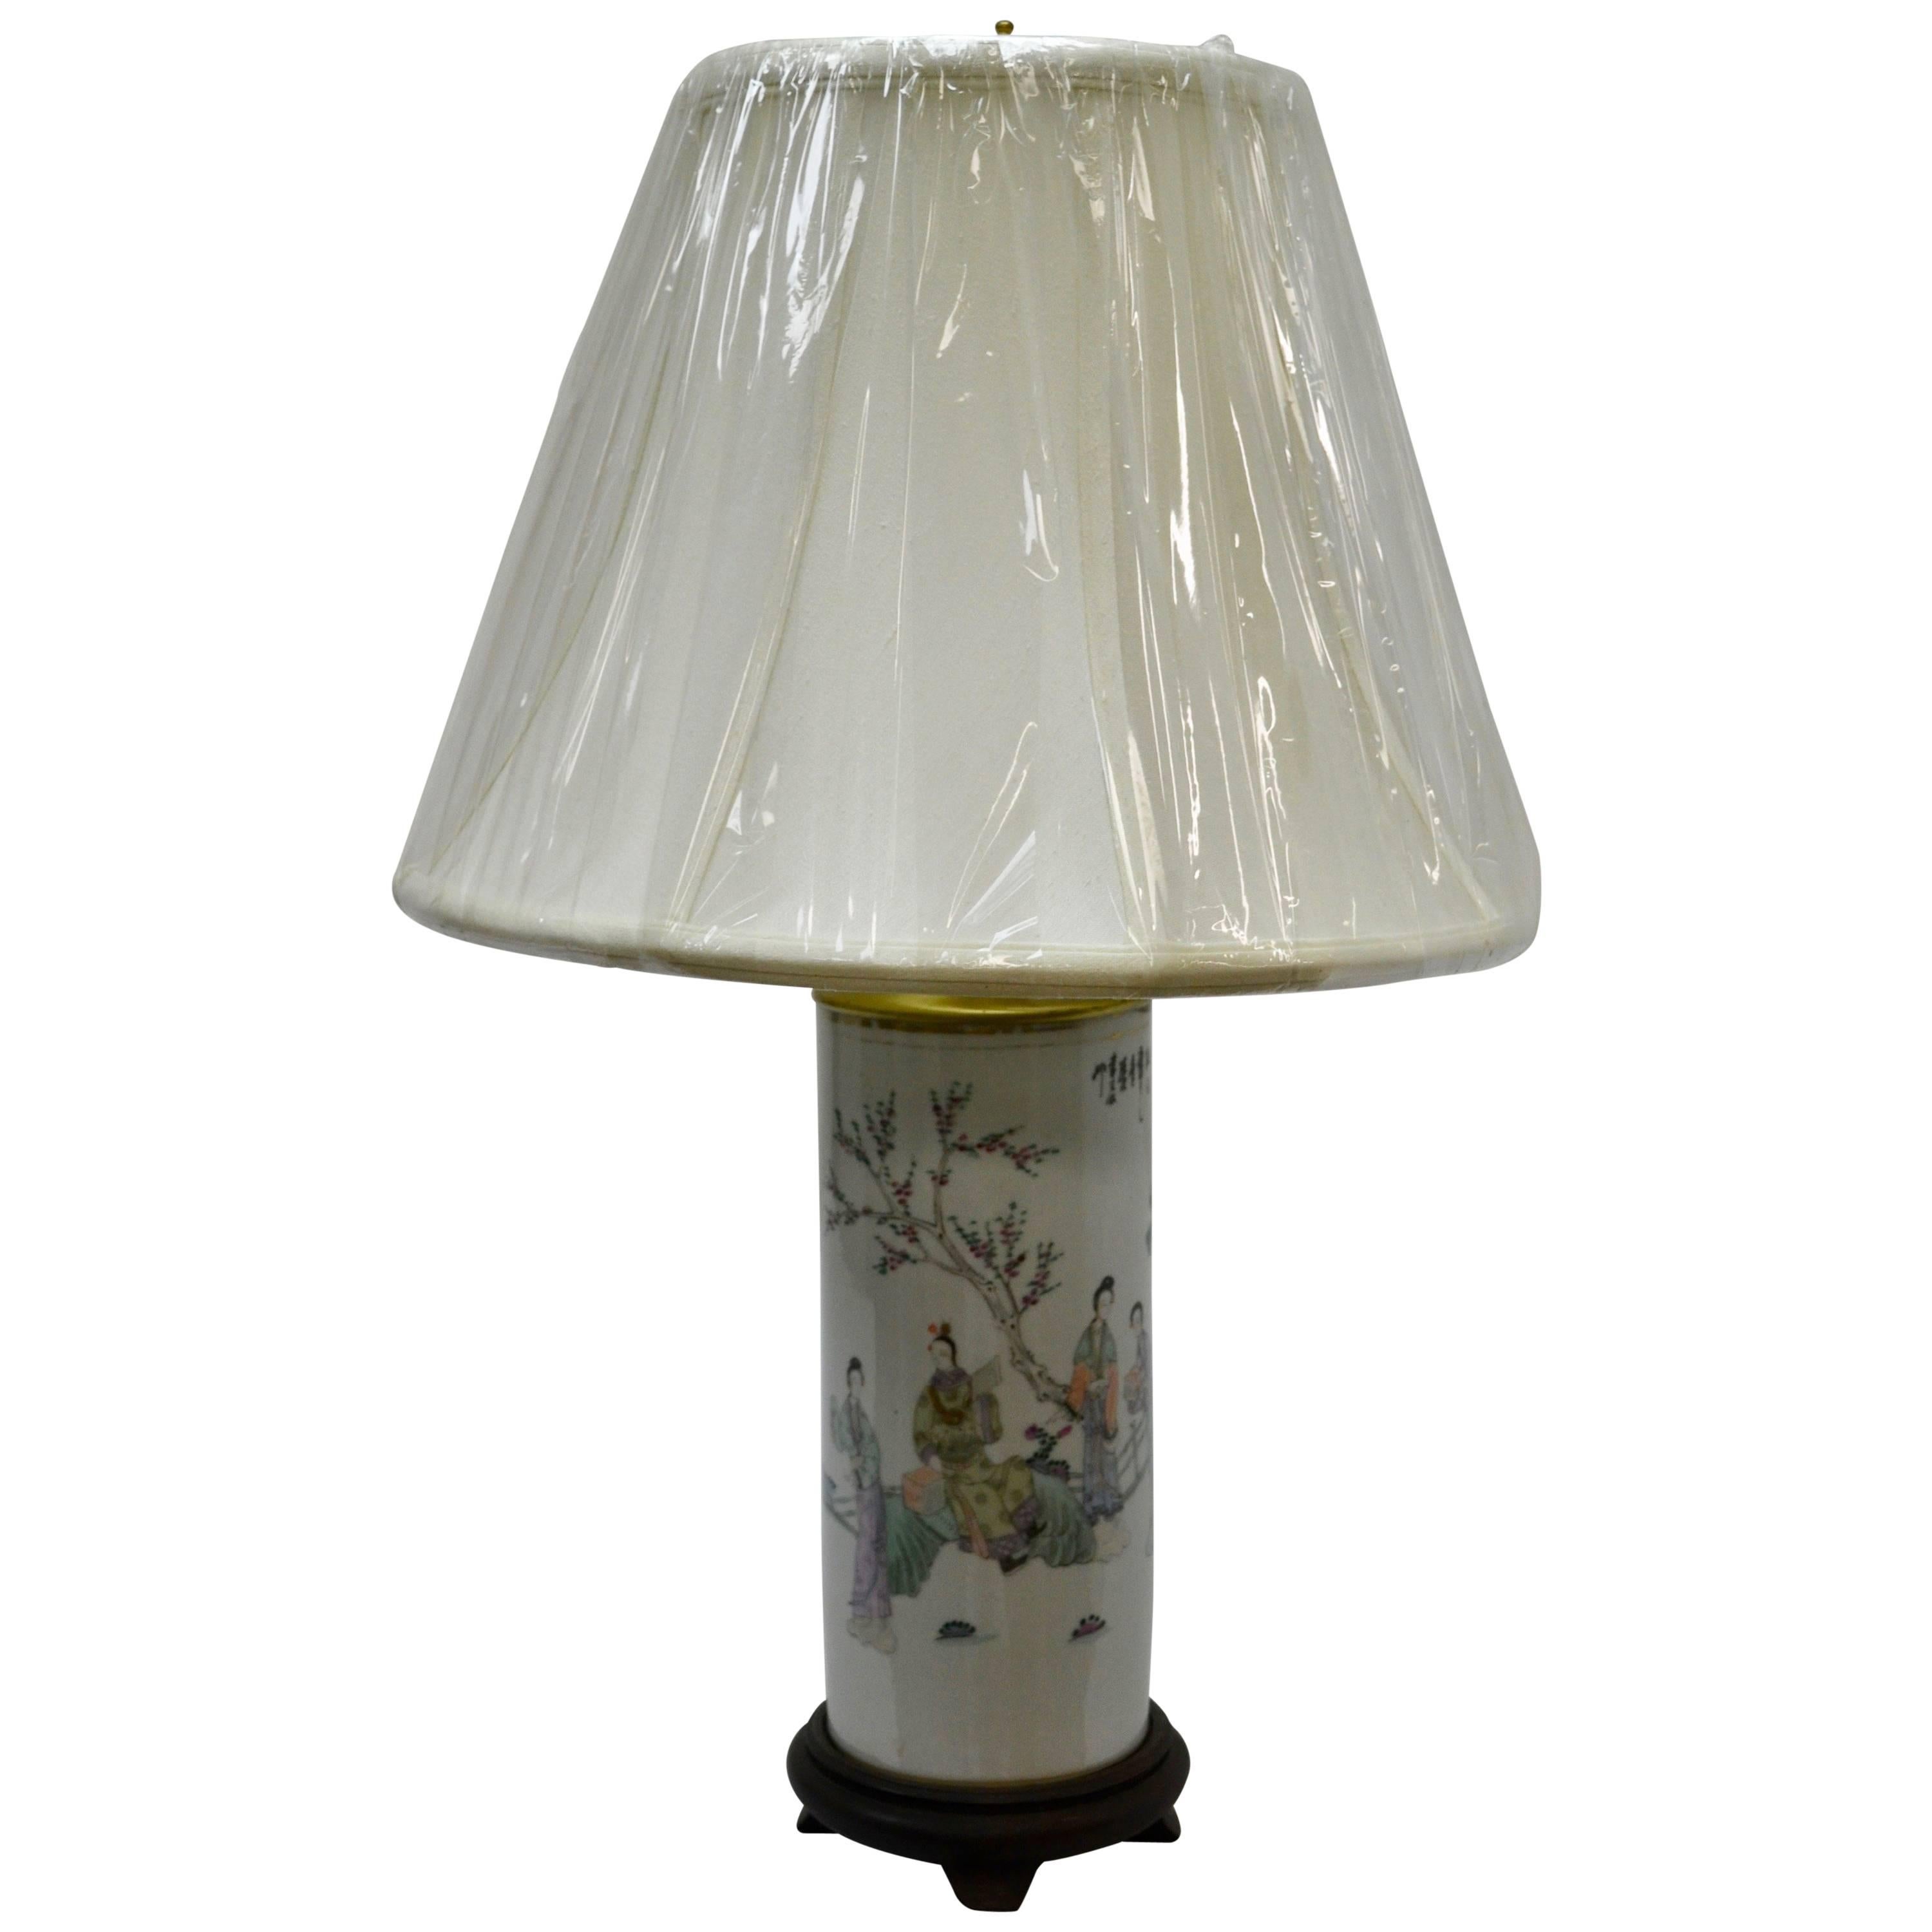 Chinese Porcelain Hat Stand Table Lamp For Sale